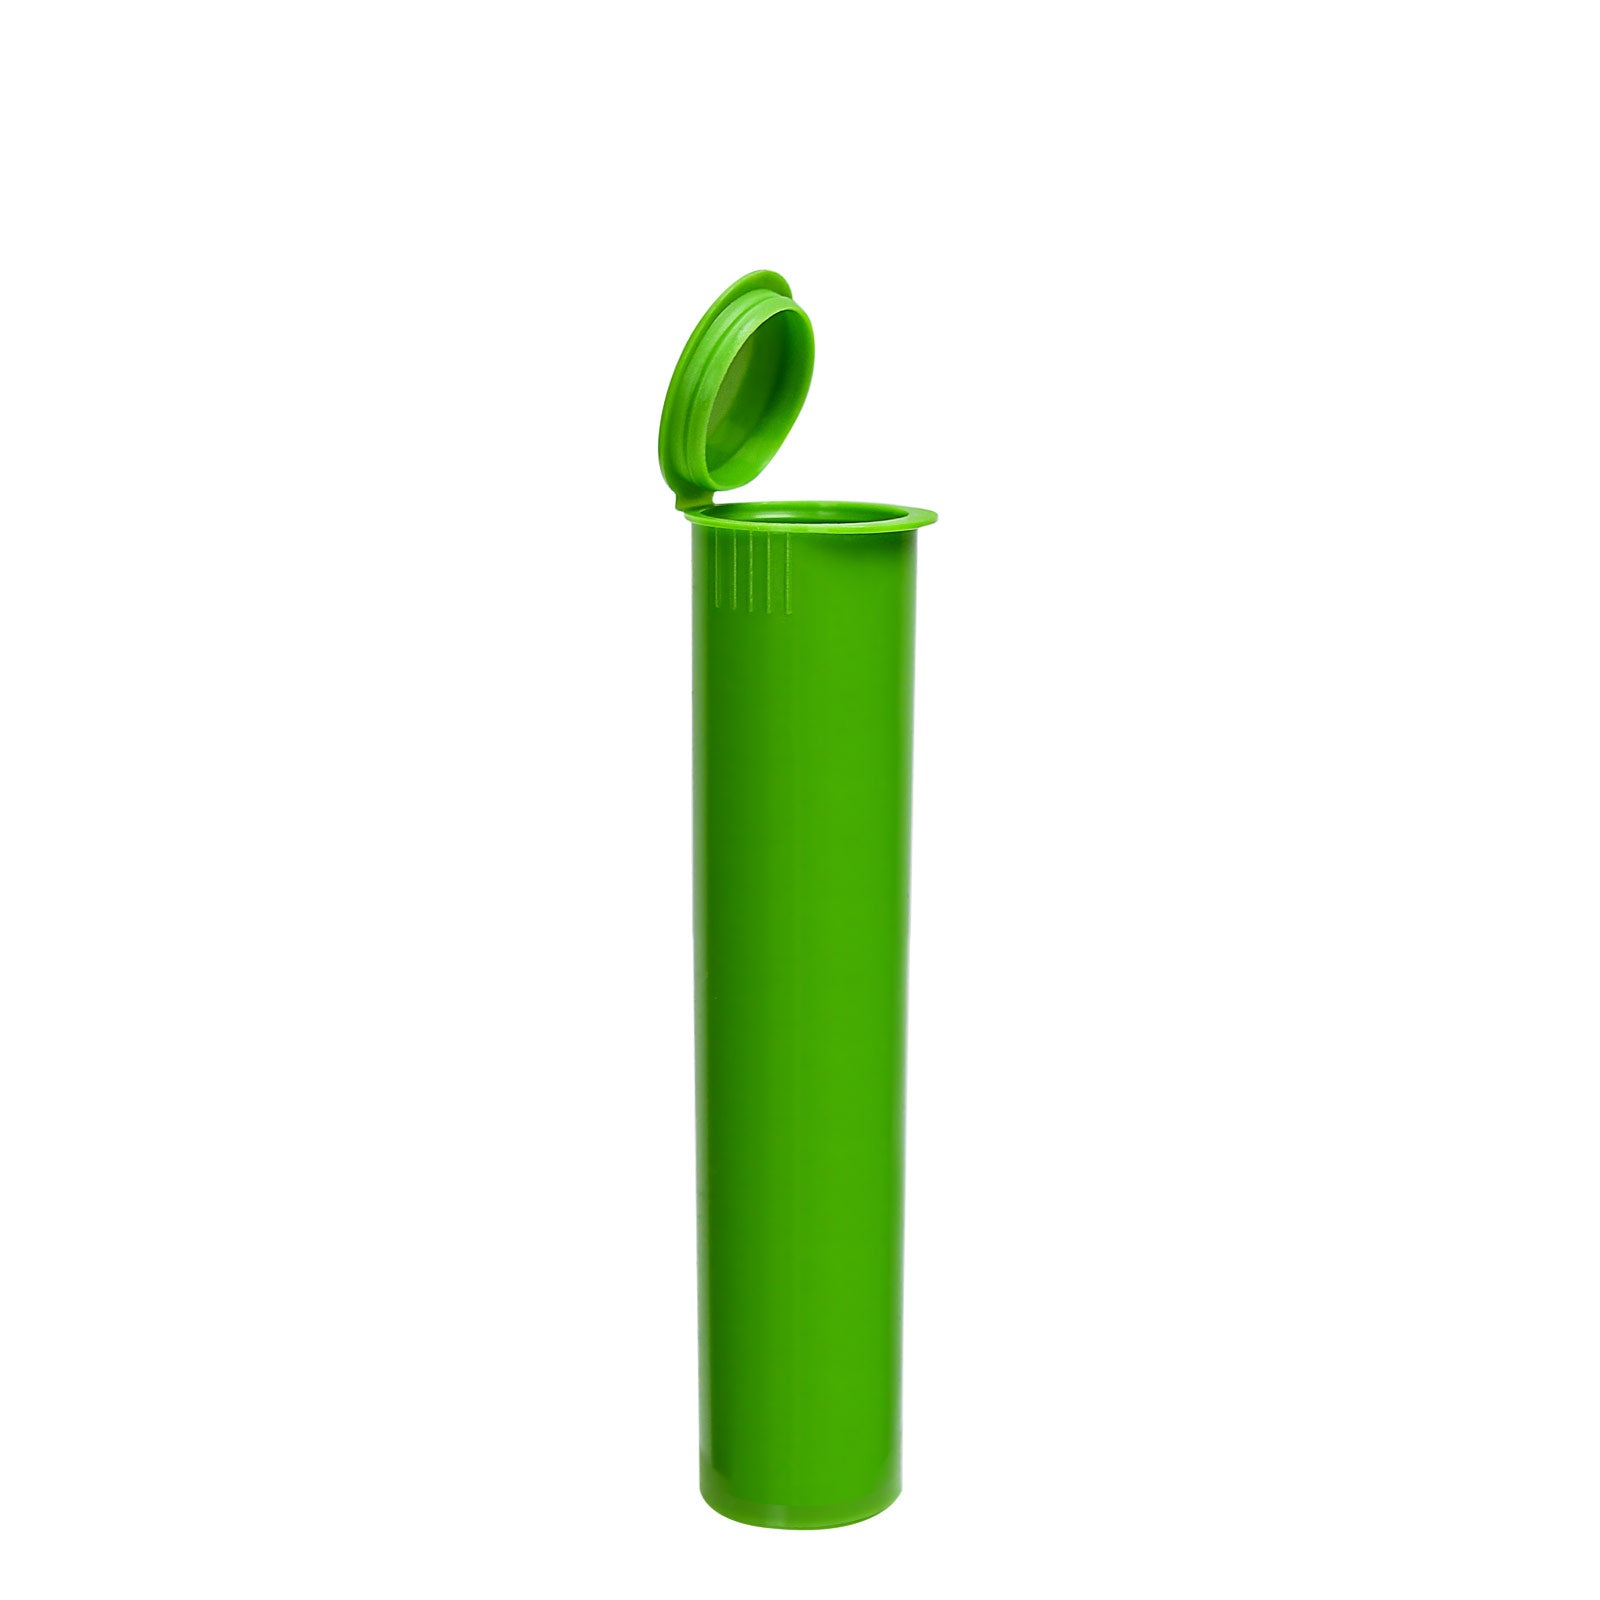 98mm Rx Squeeze Tubes Opaque Green - 1 Count